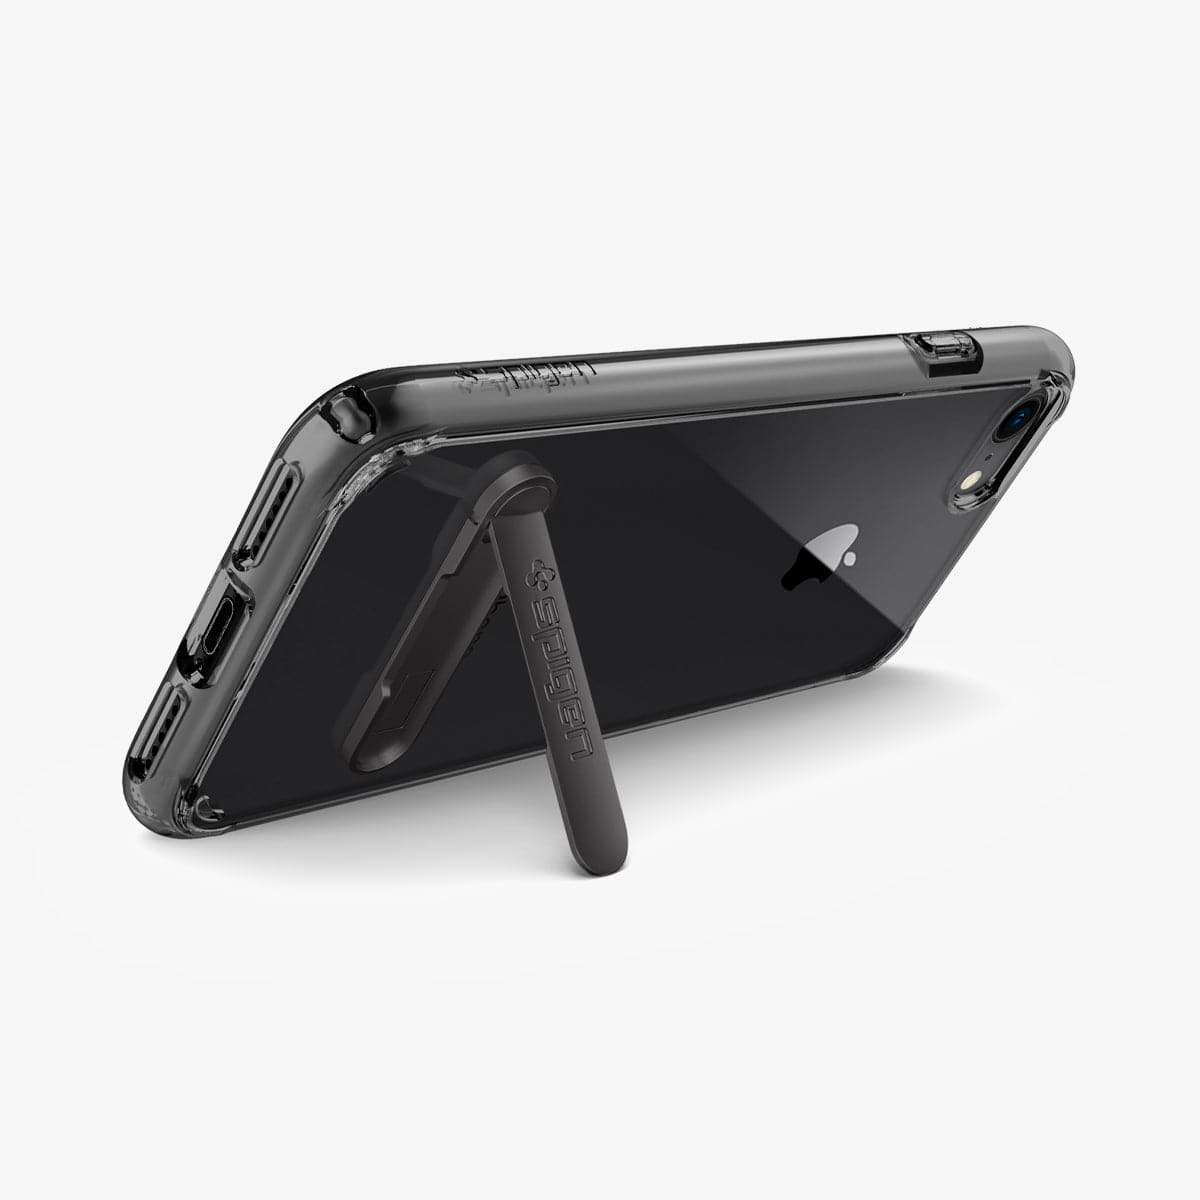 054CS22212 - iPhone 8 Series Ultra Hybrid S Case in Jet Black showing the back, partial side with built in kickstand propped up